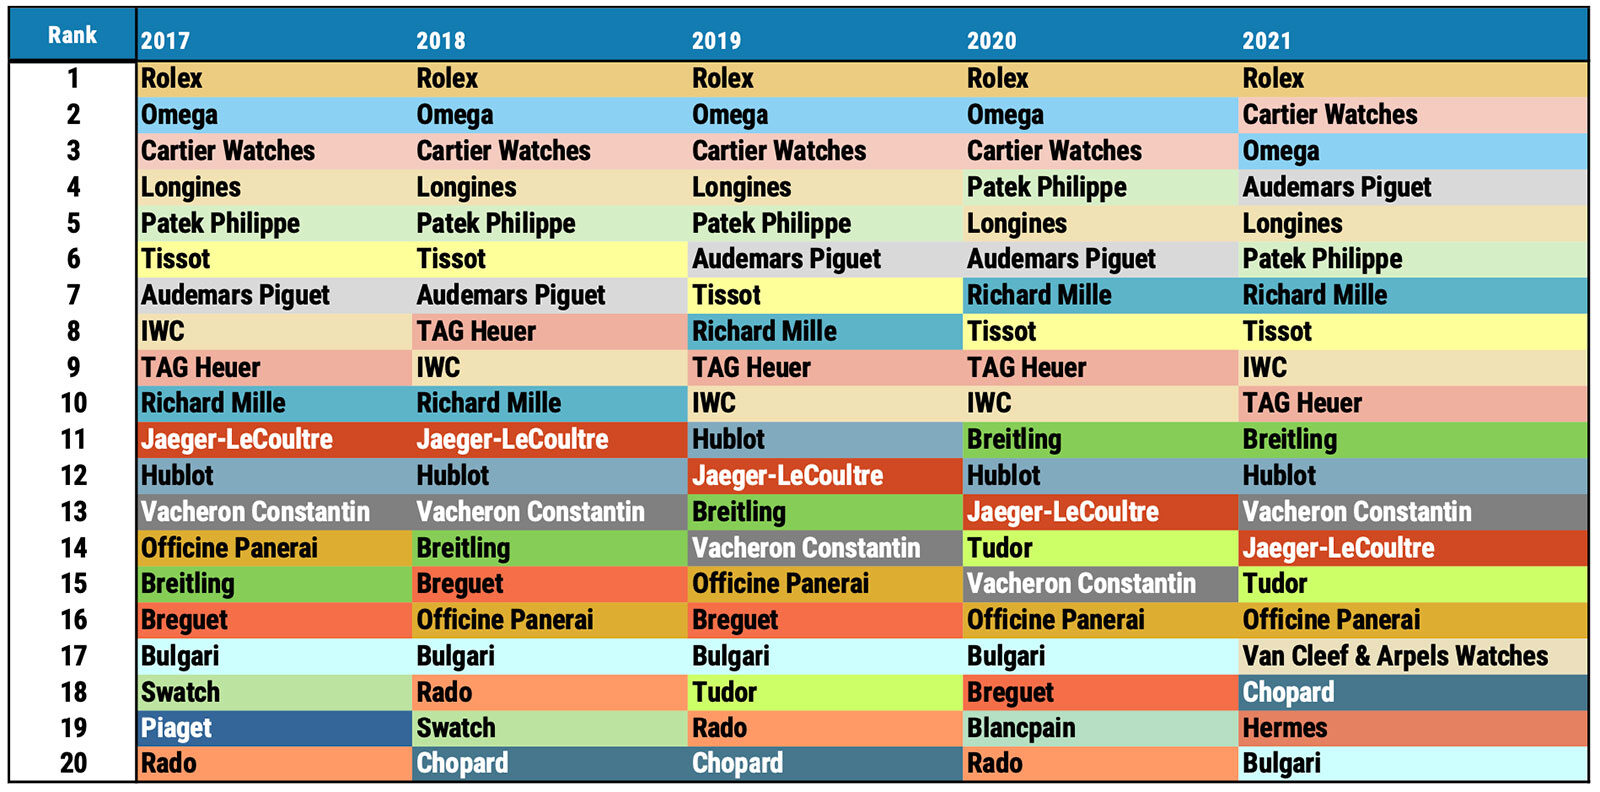 Morgan Stanley Top20 Swiss Watch Brands from 2017 to 2022 1